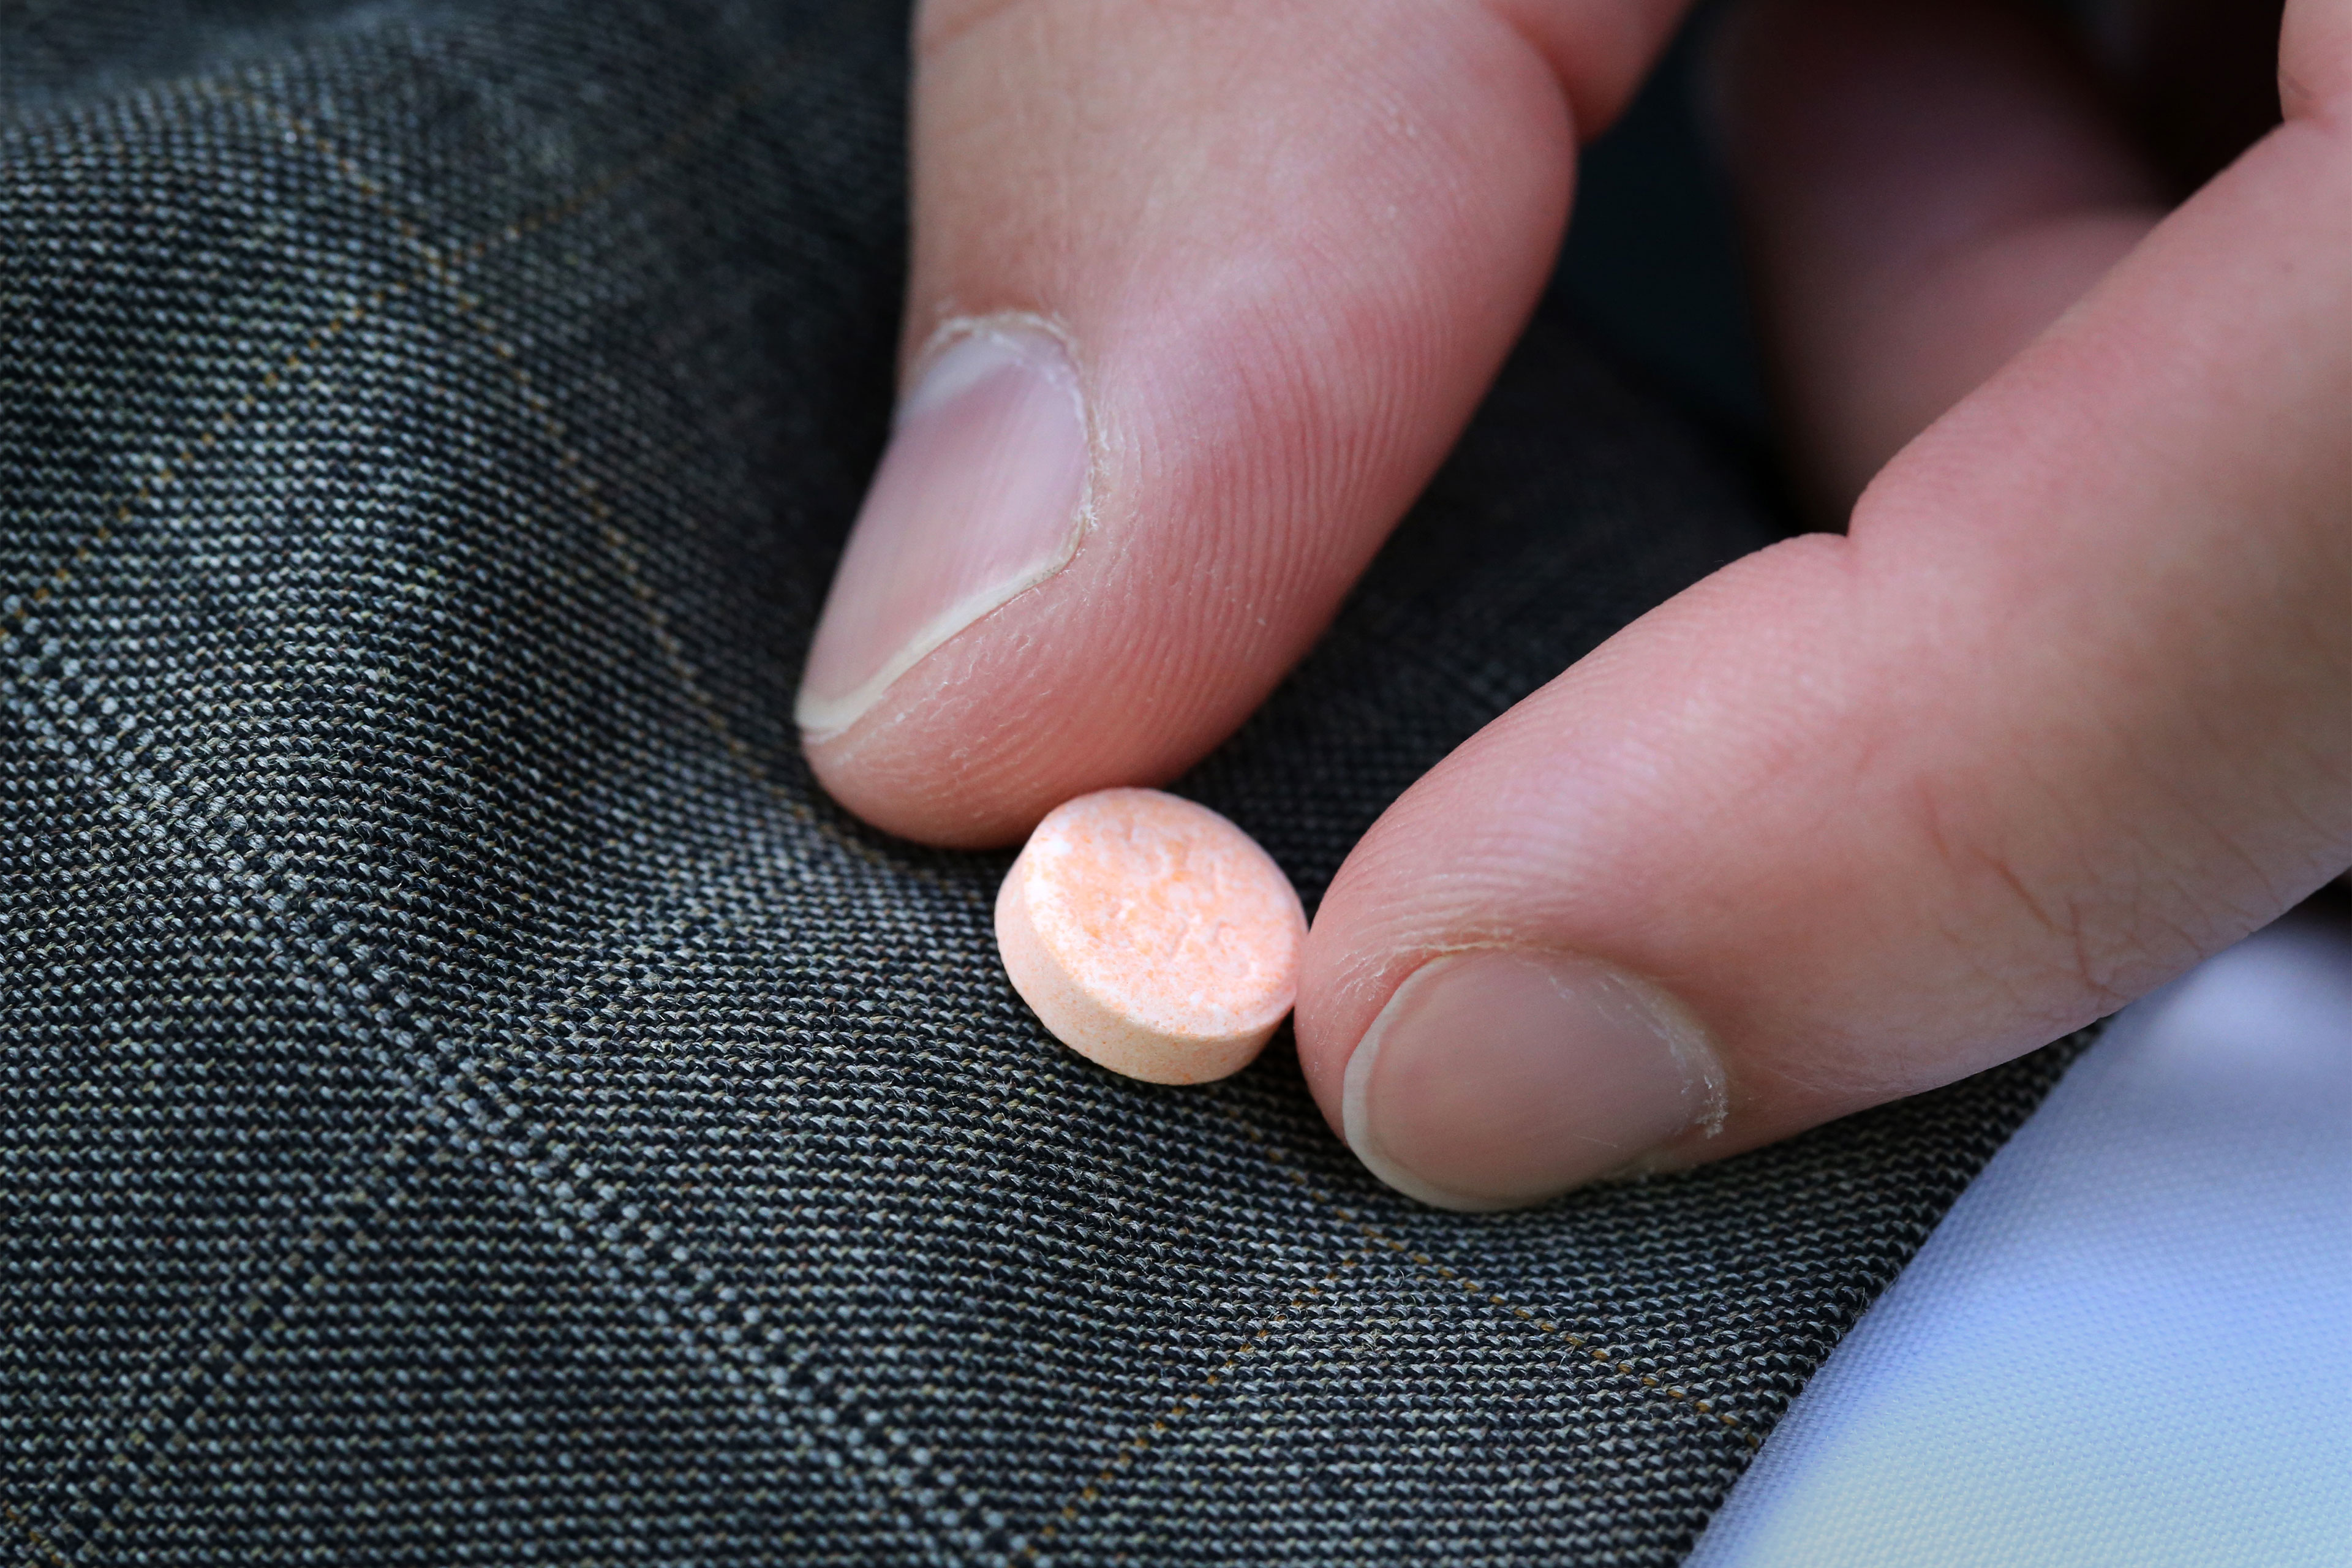 A photo shows someone holding a Suboxone tablet.